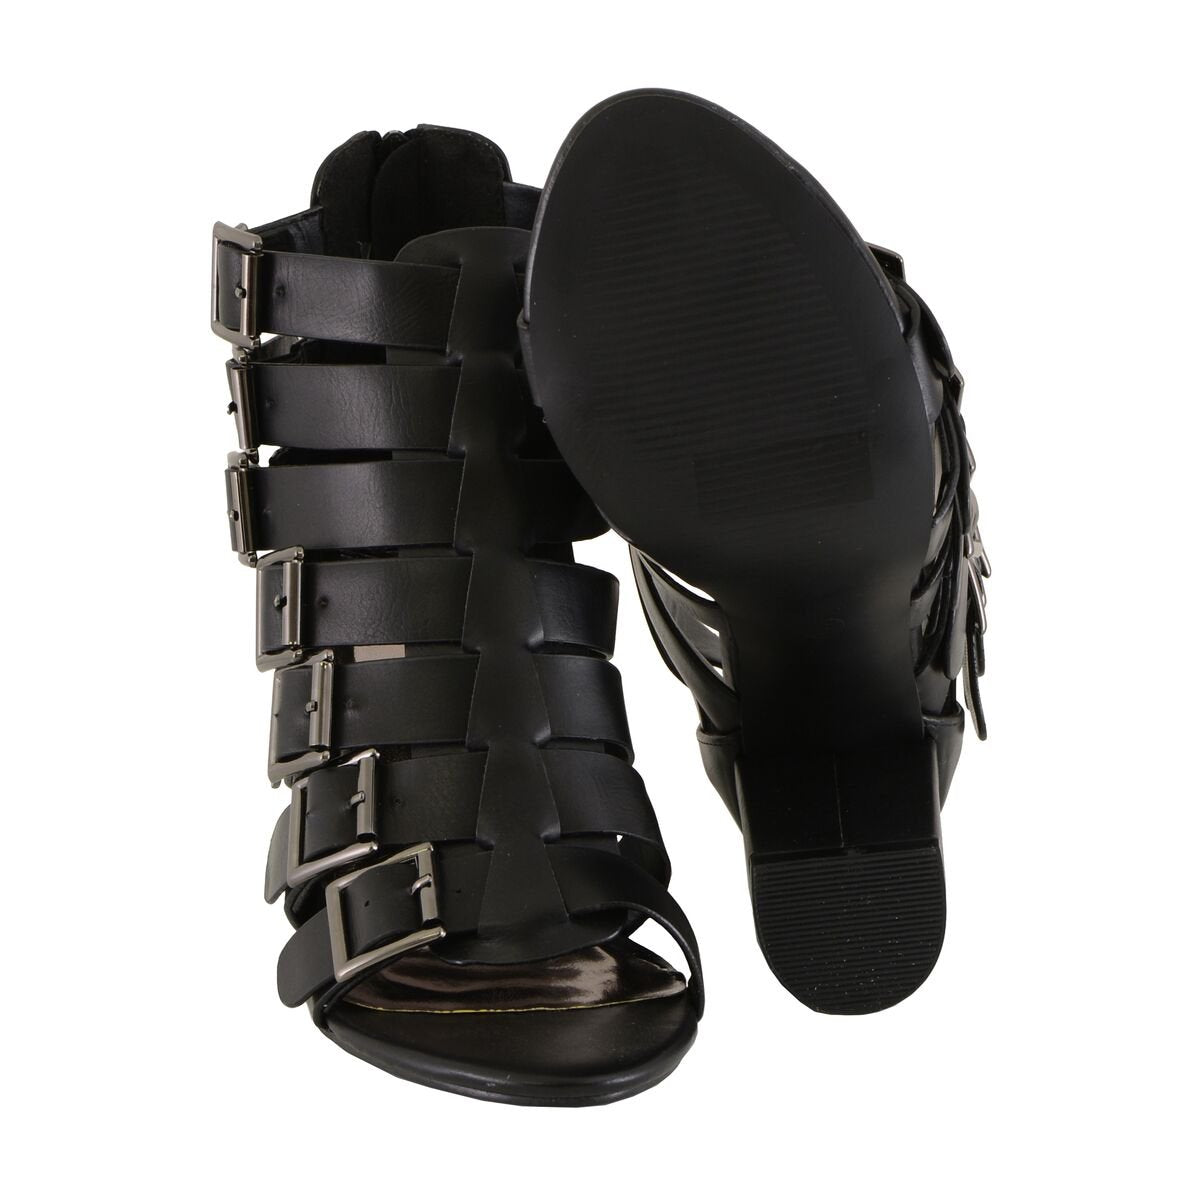 Milwaukee Leather MBL9420 Women's Black Fashion Casual Sandal with  Straps and Block Heel